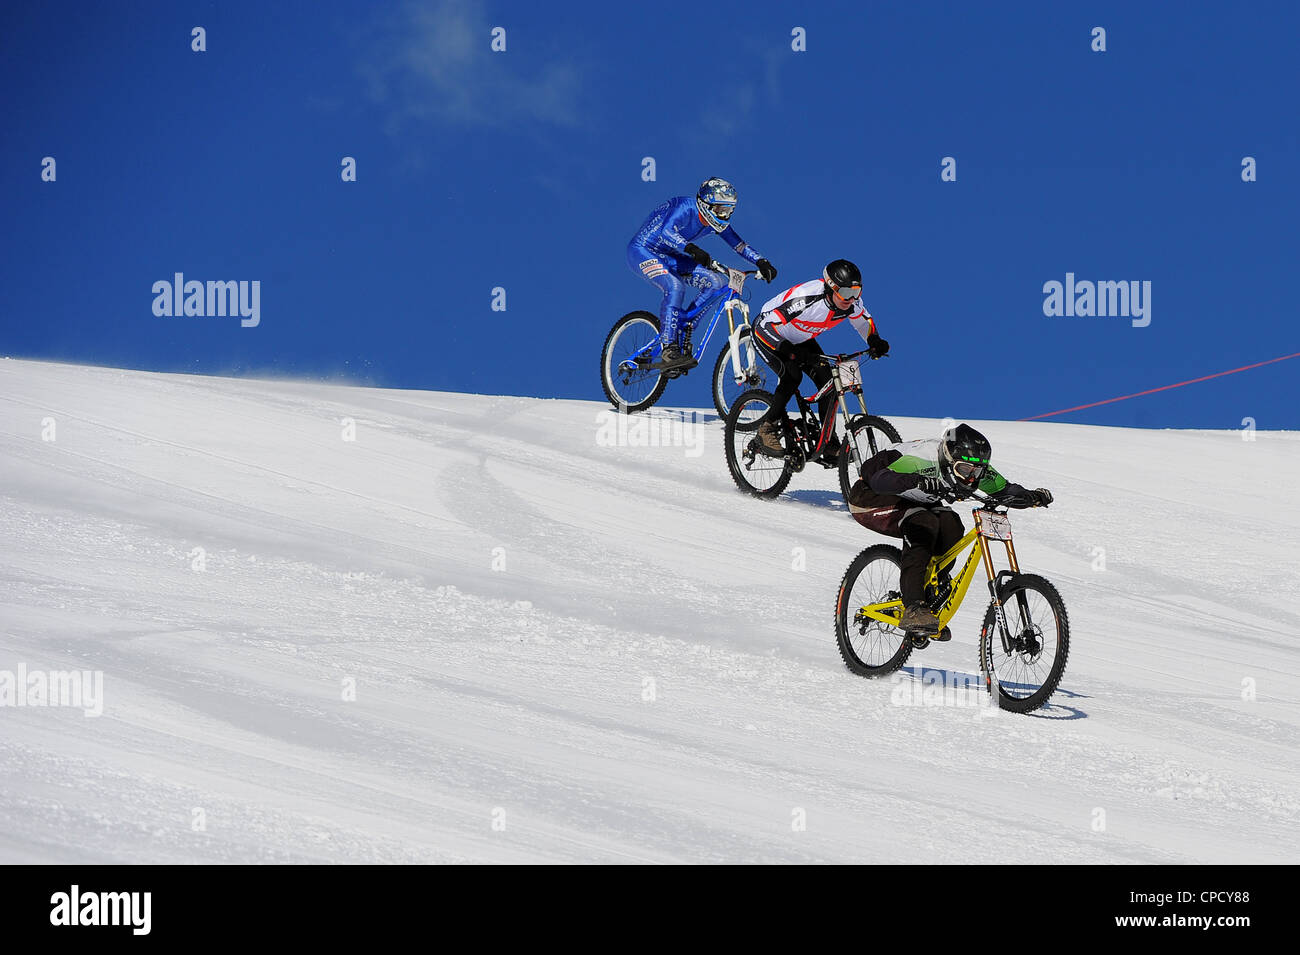 Downhill mountain bikers race at speed on snow during the Saas Fee Glacier Bike race in Switzerland. Stock Photo